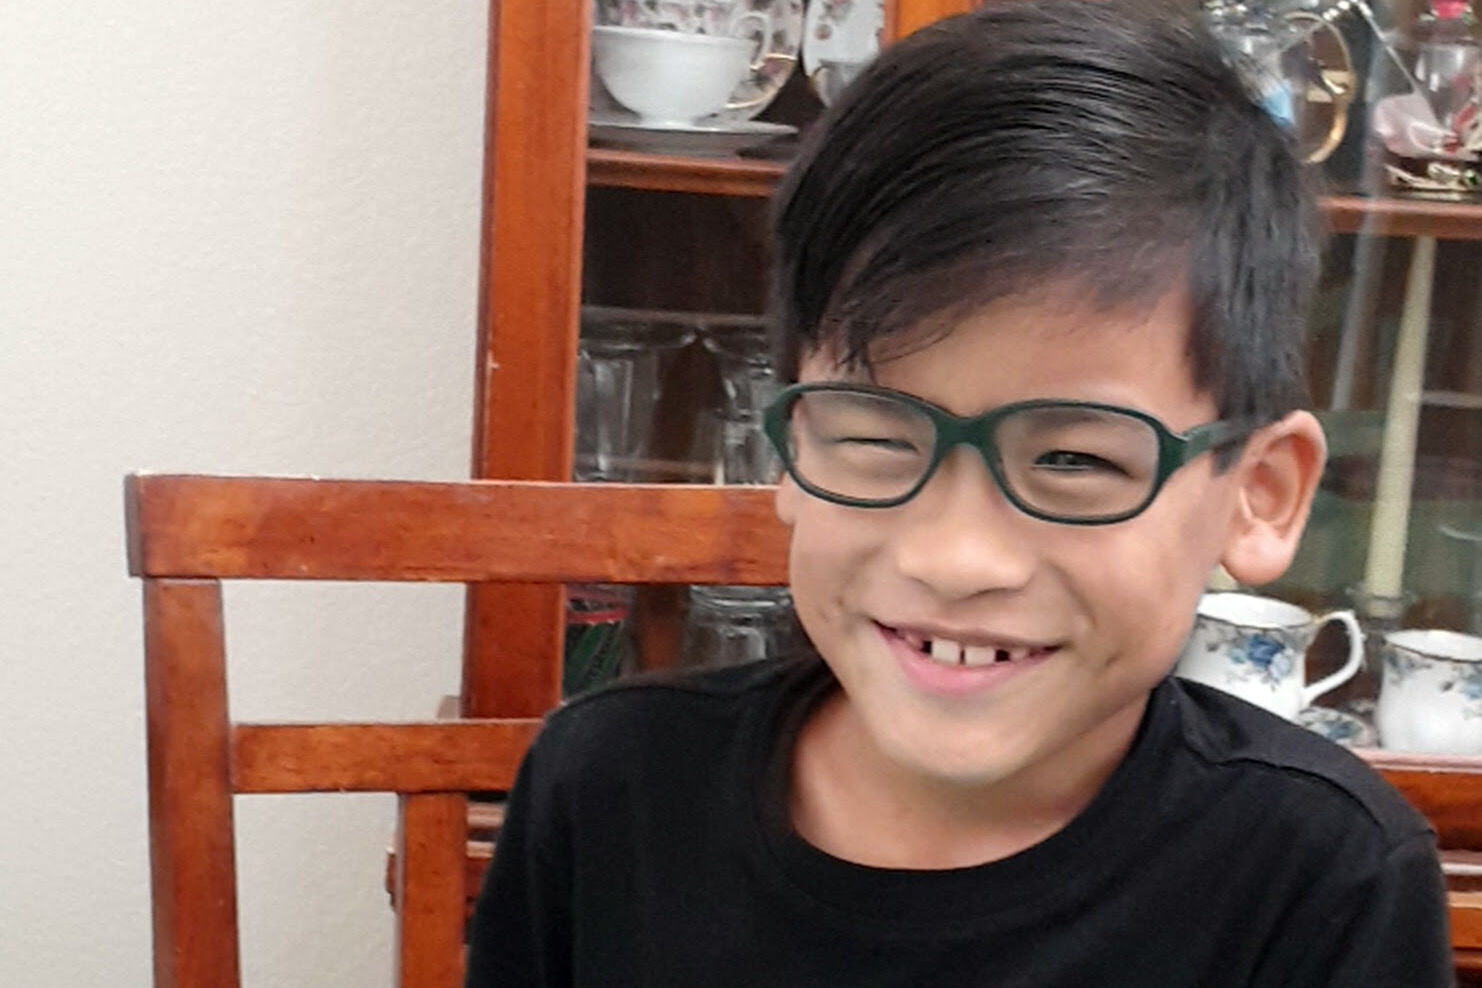 Levi, a young boy, wearing green glasses and a black T-shirt, smiling cheekily for the camera. 